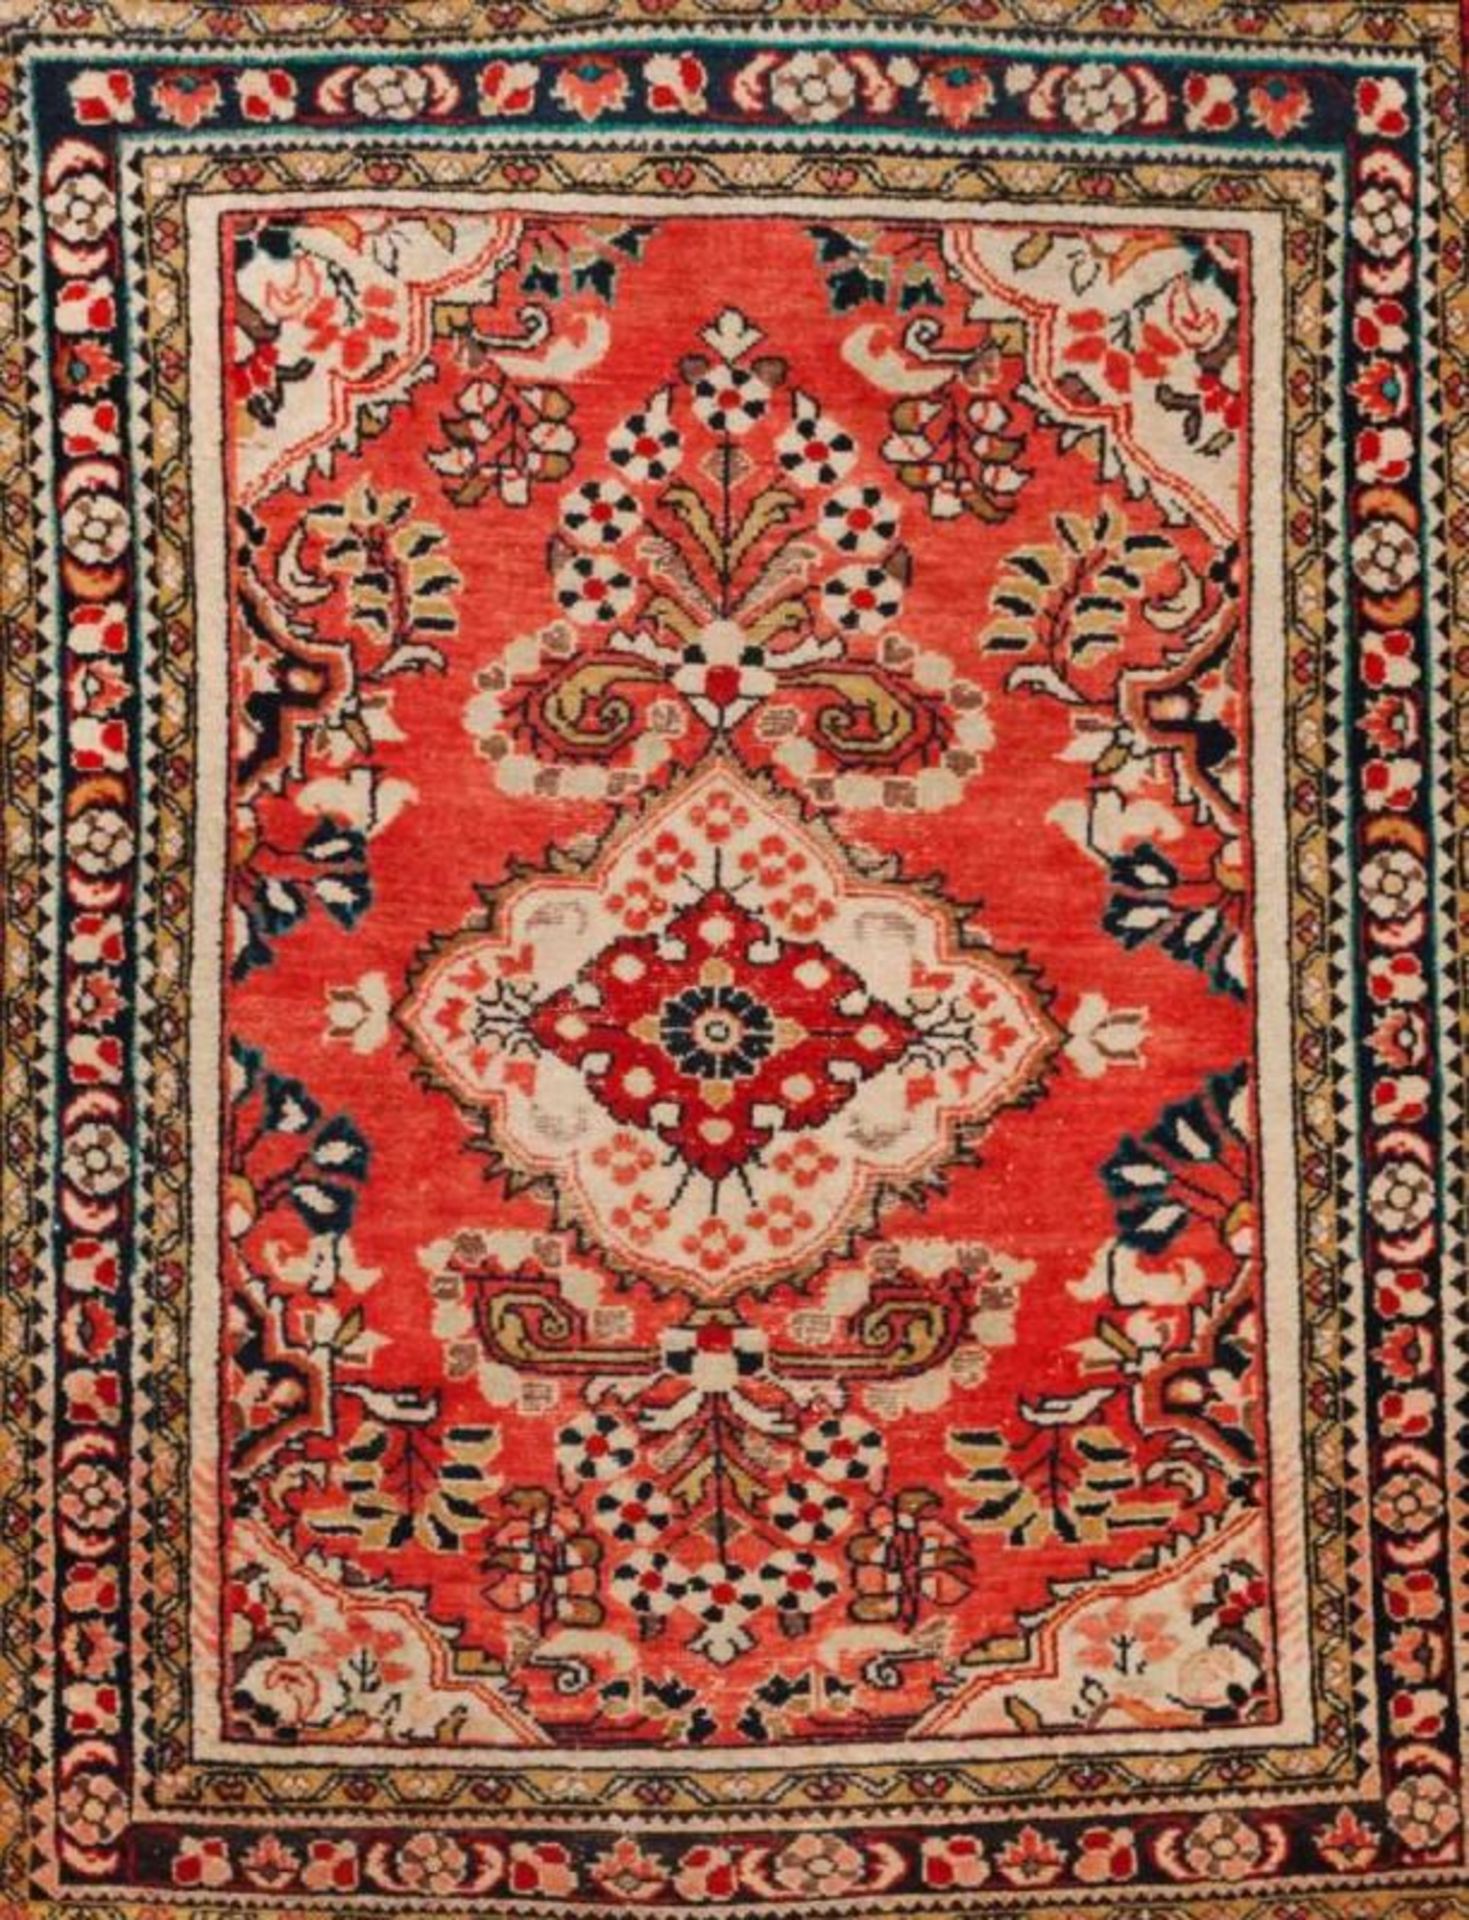 A Kashan carpet, Iran Cotton and wool Floral decoration in red, blue and beige 150x120 cm